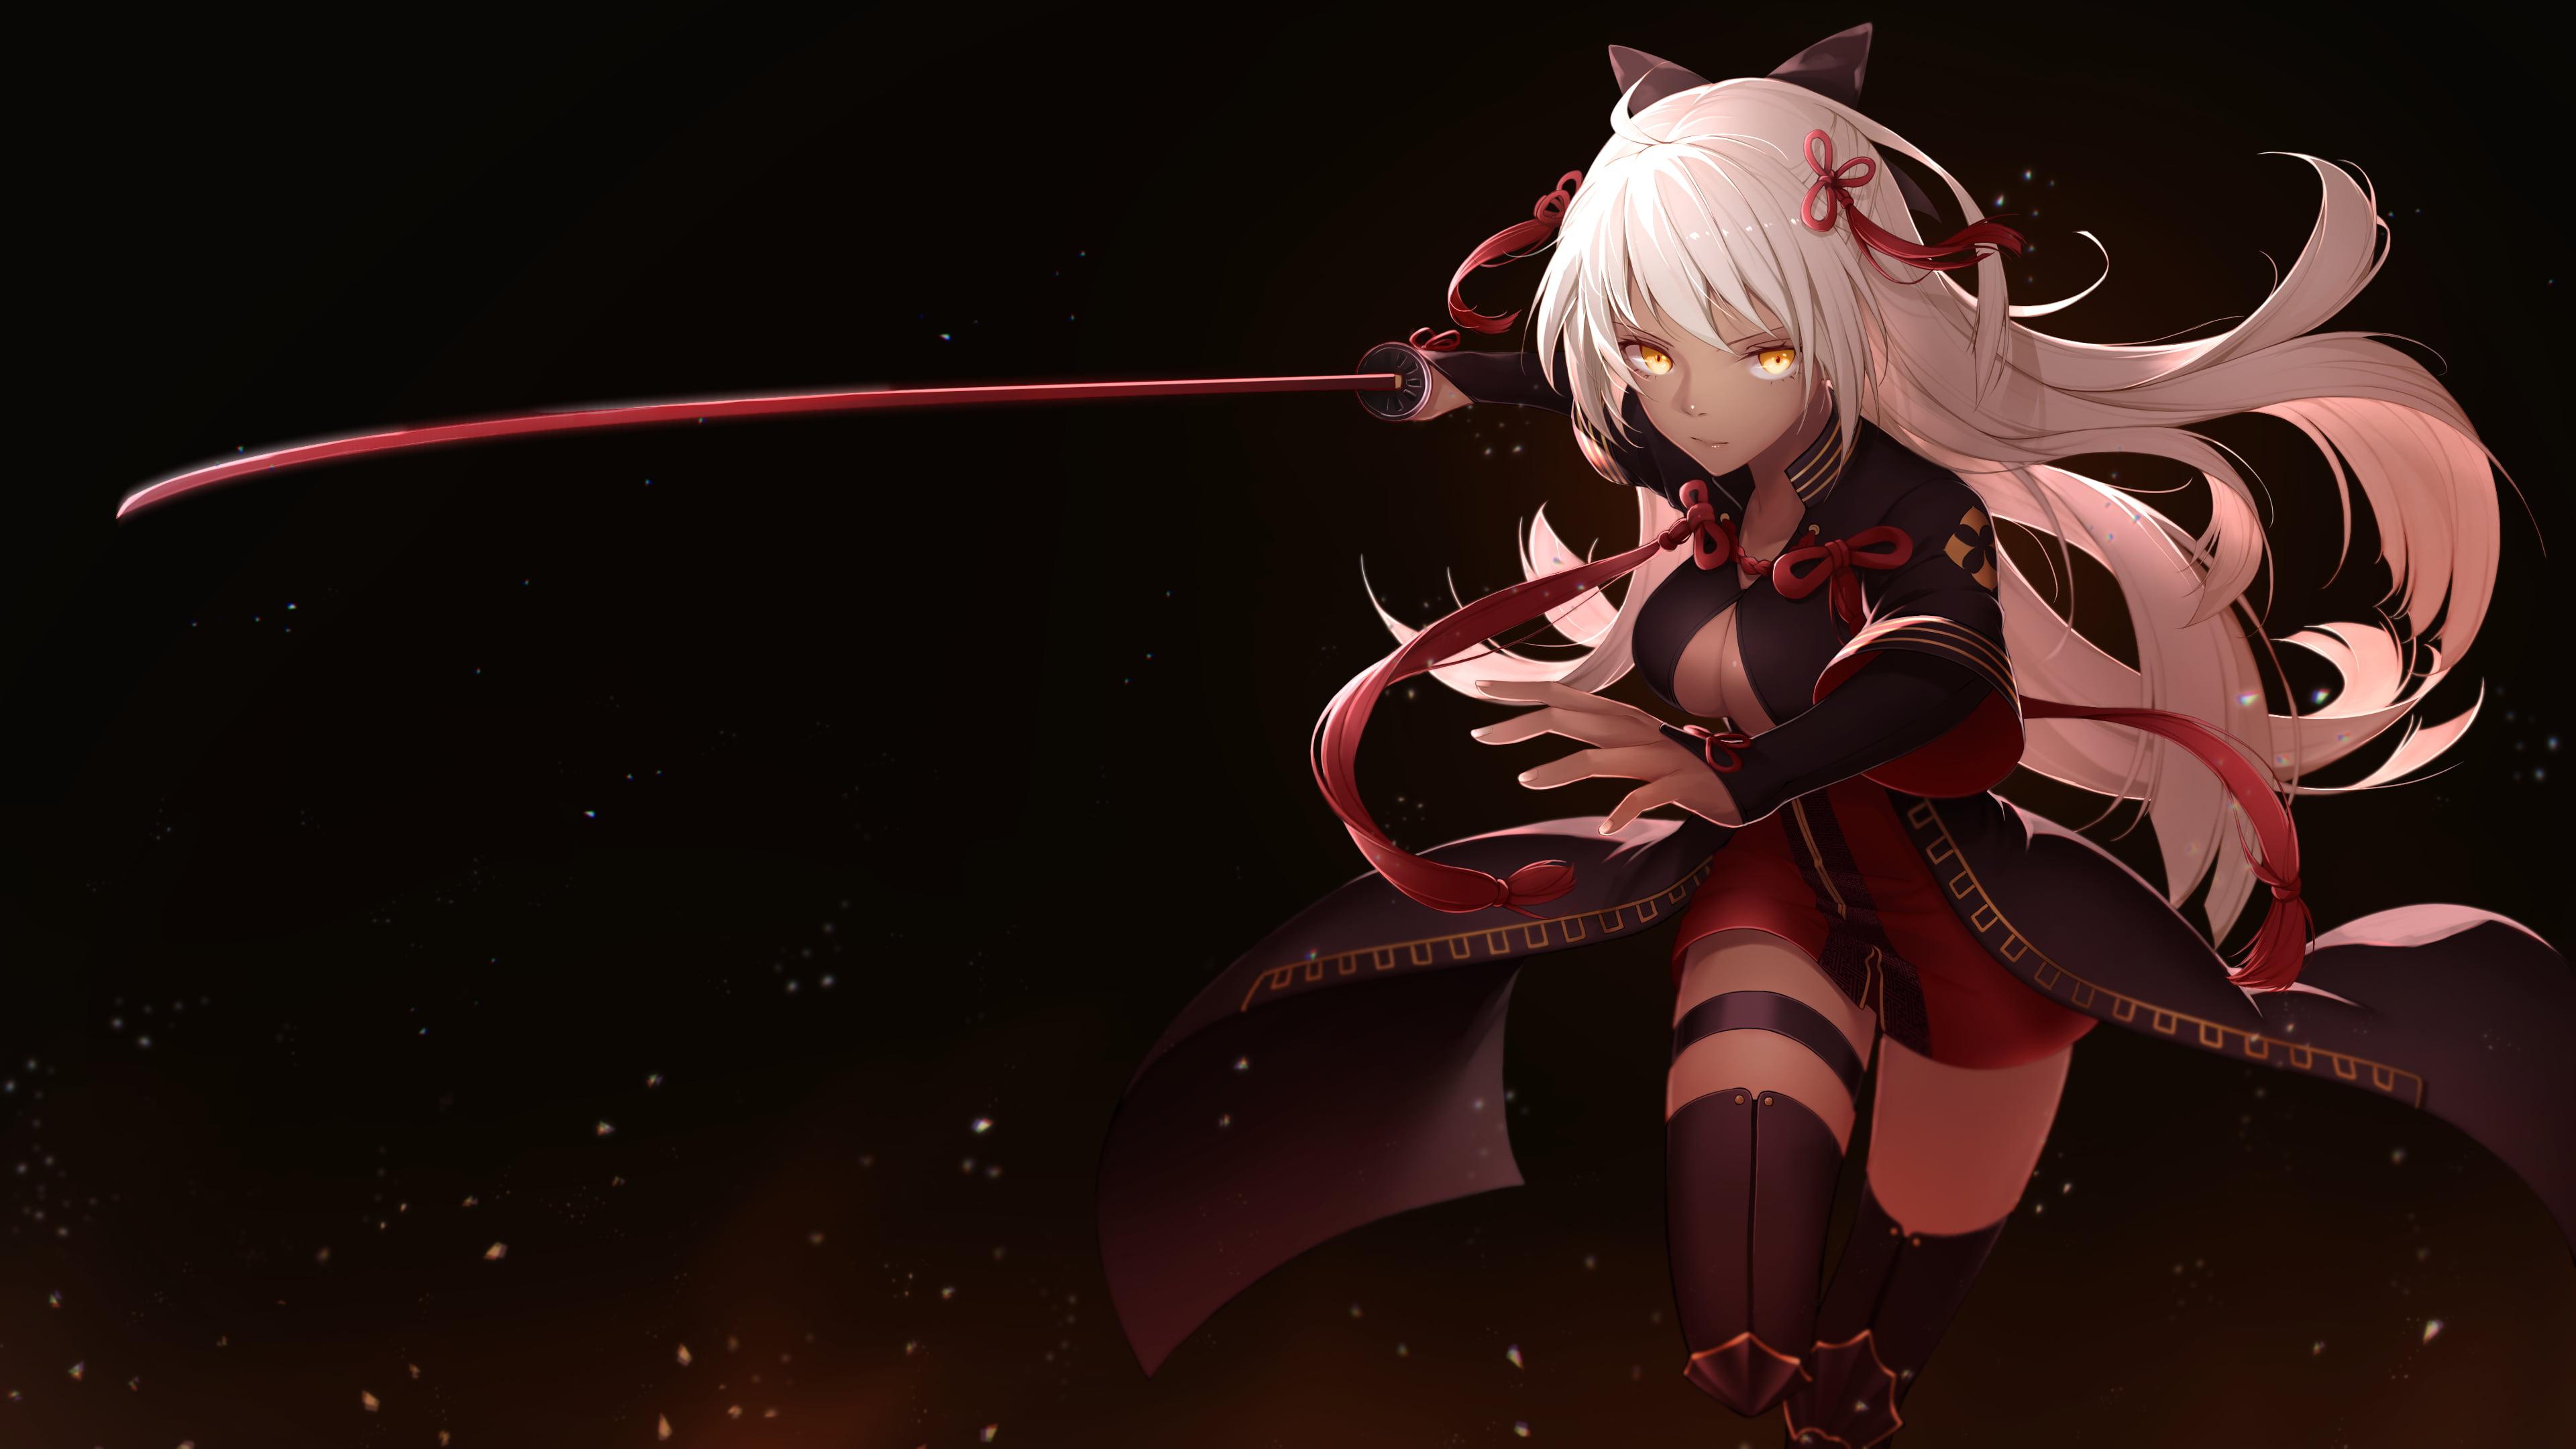 White haired female anime character with sword illustration